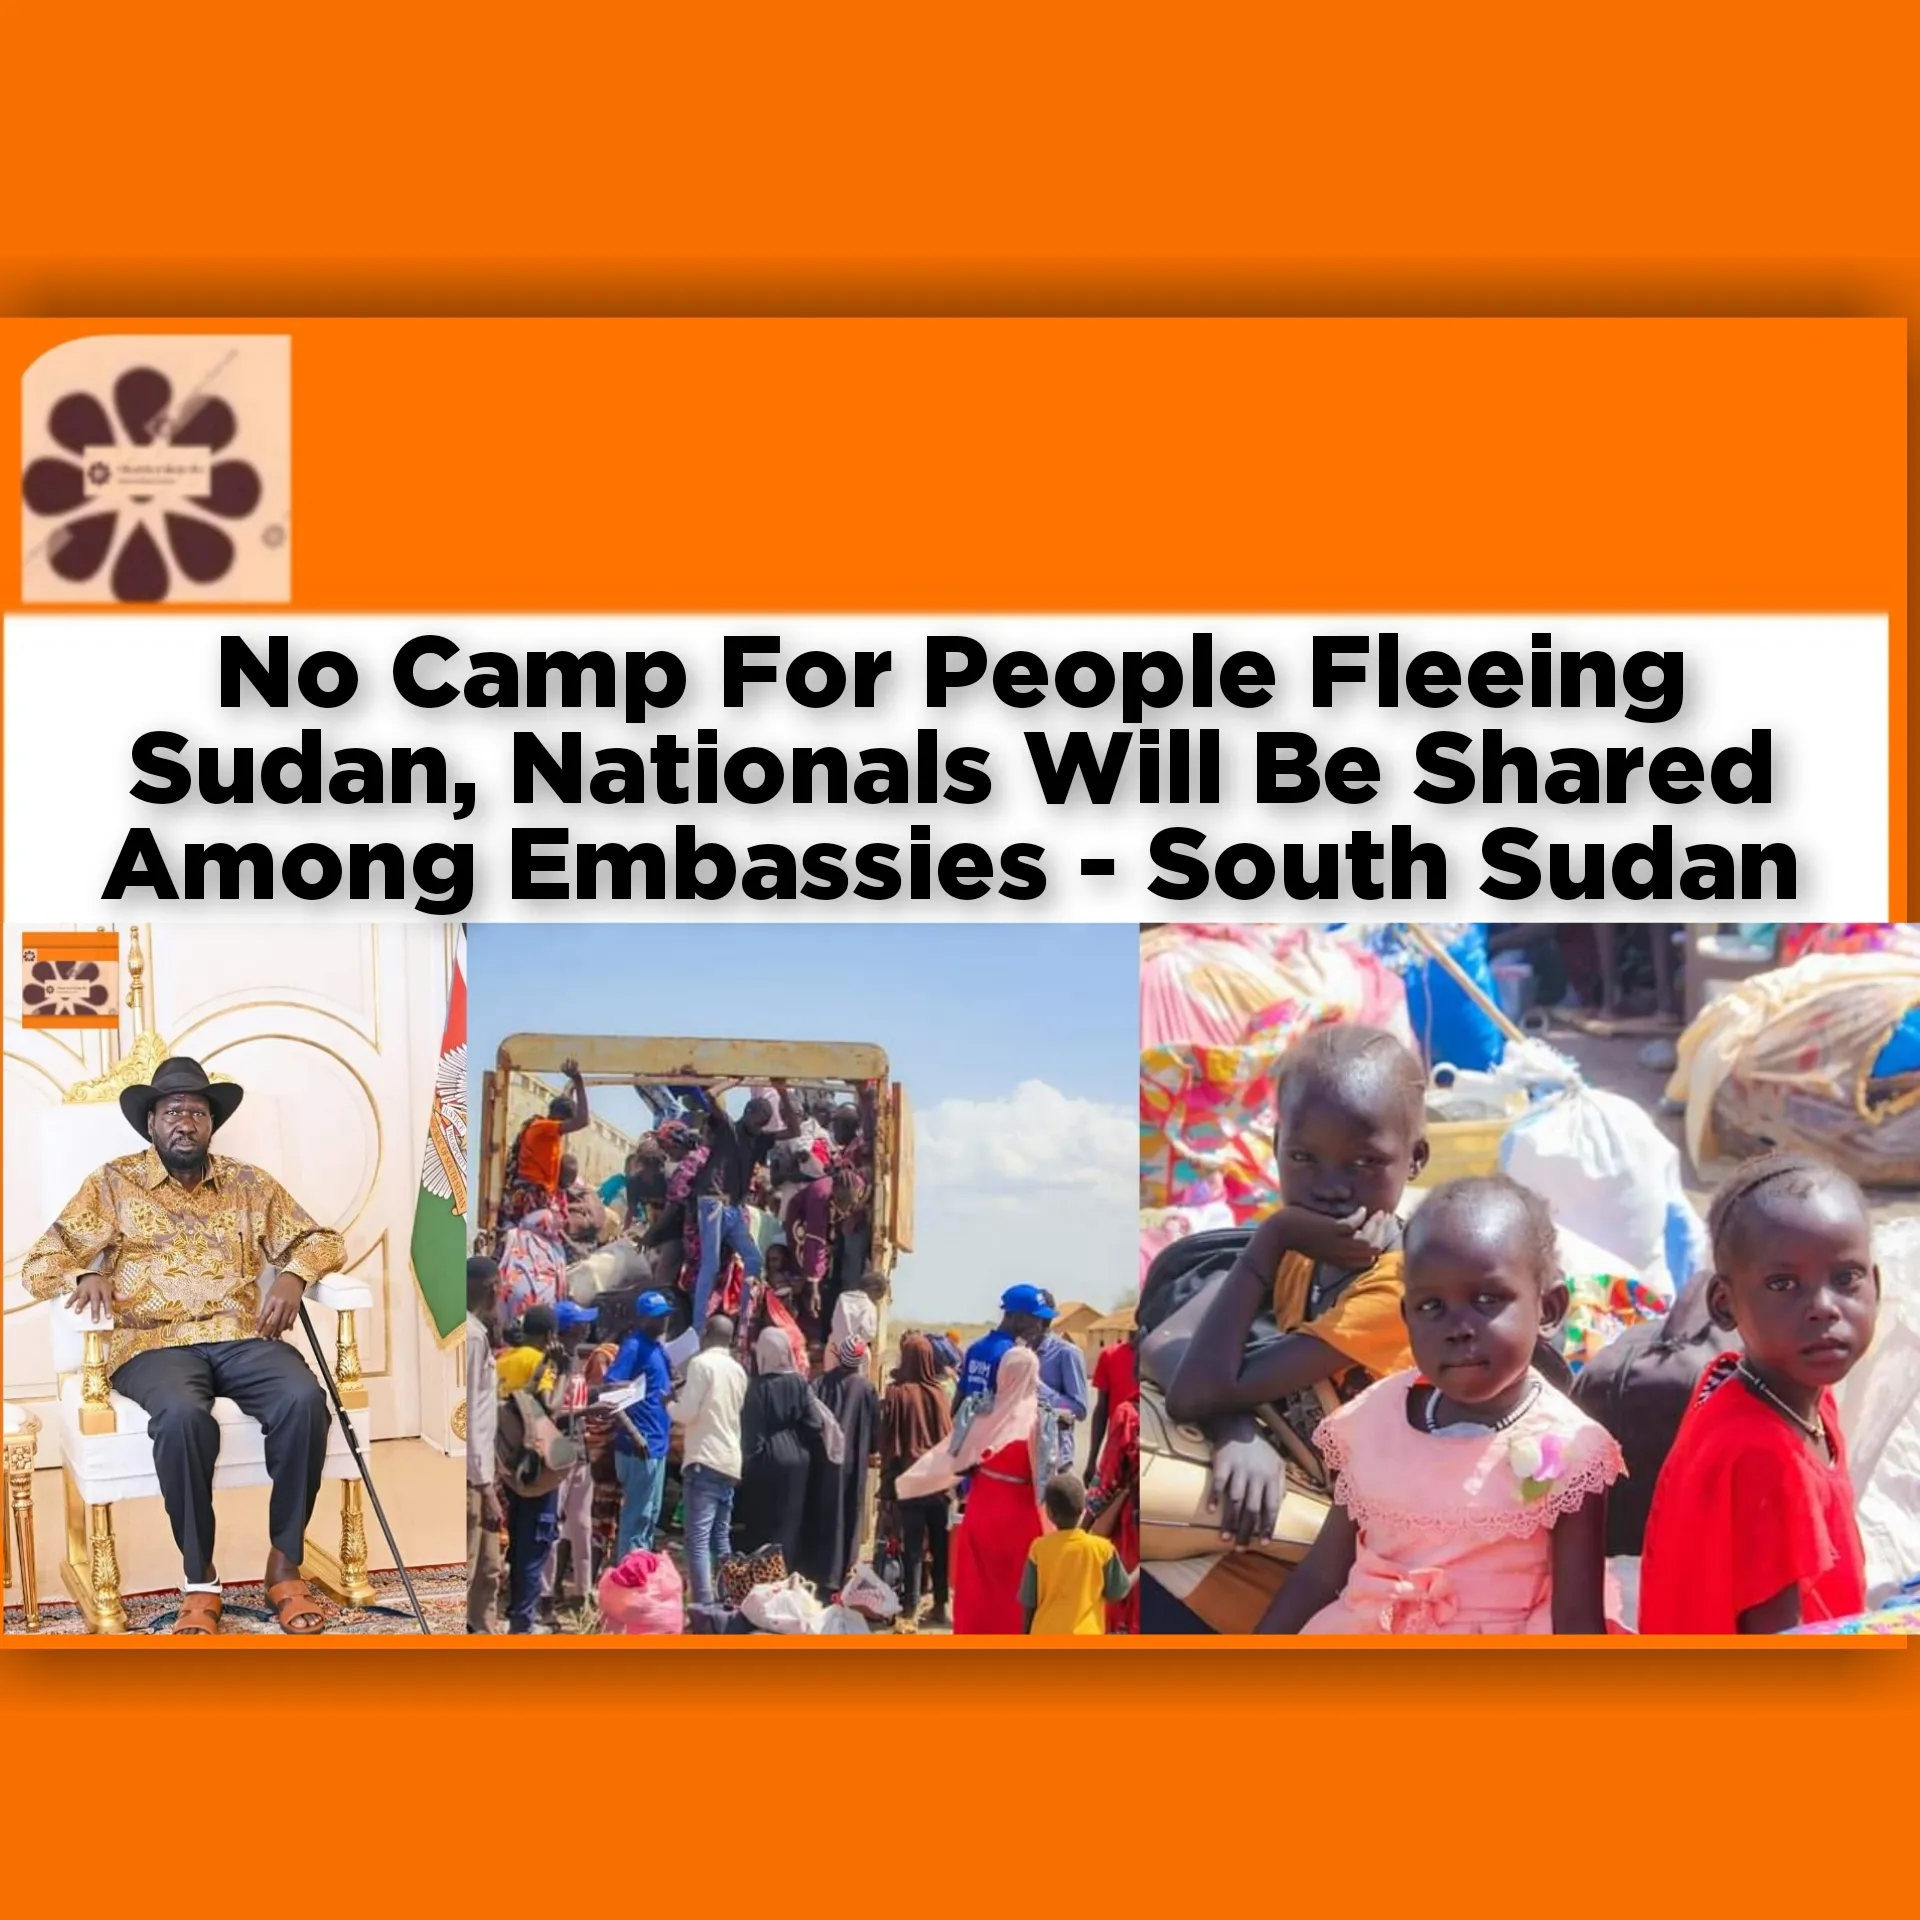 No Camp For People Fleeing Sudan, Nationals Will Be Shared Among Embassies - South Sudan ~ OsazuwaAkonedo #embassies #fleeing #job #Khartoum #nationals #Nile #refugees #security #Sudan #war